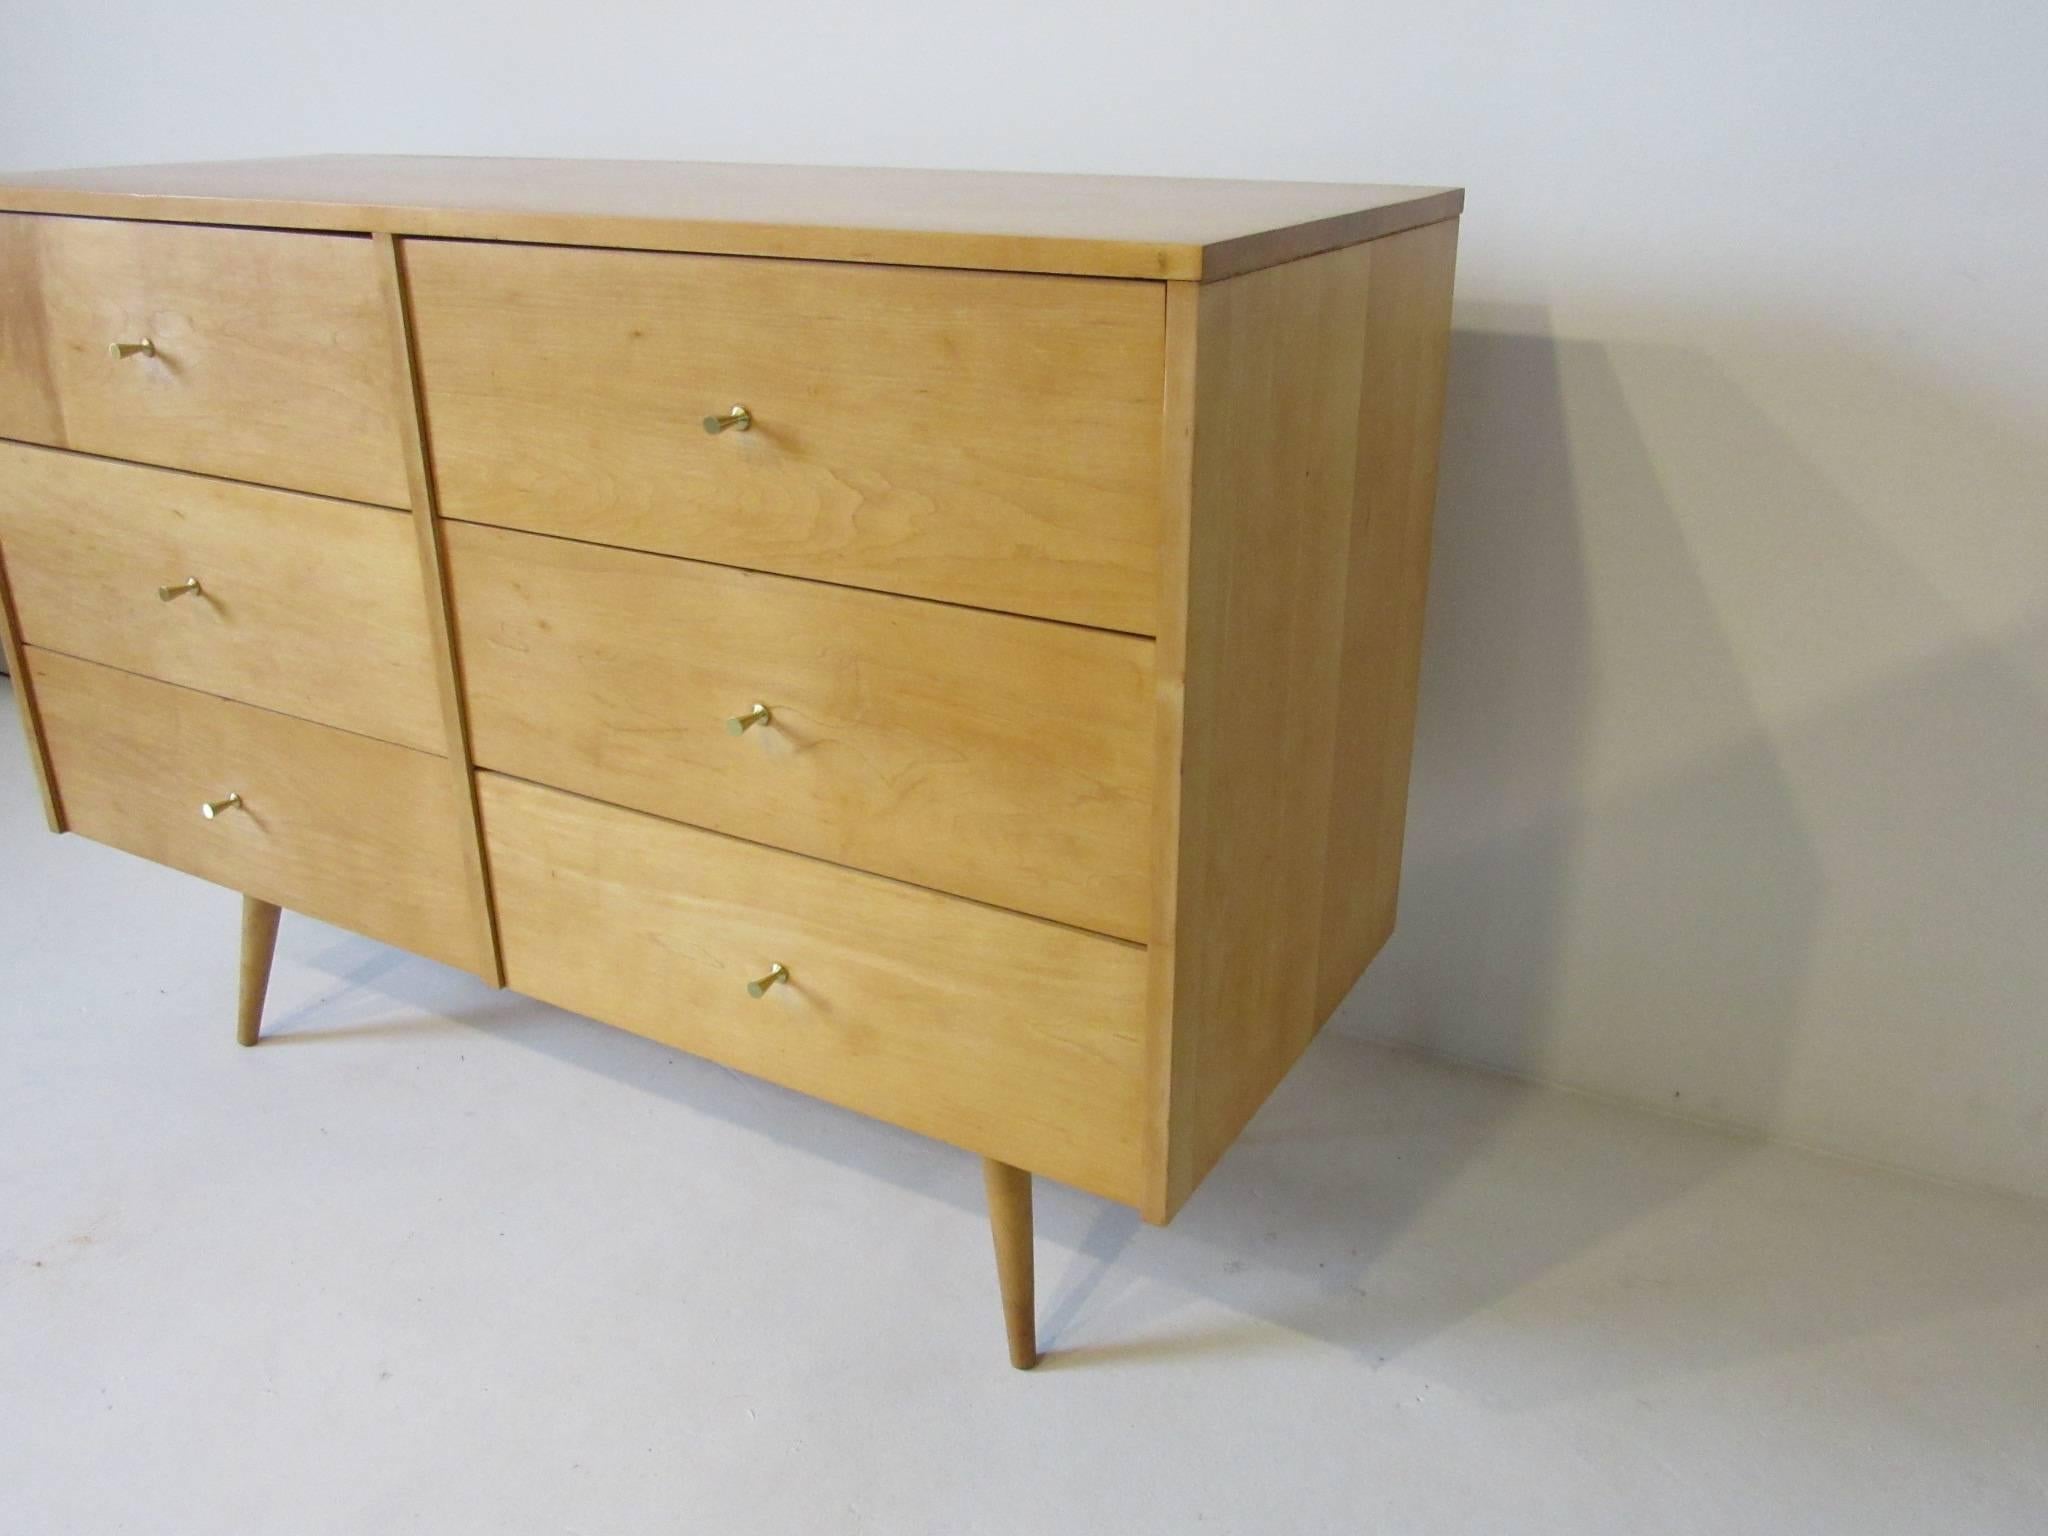 A honey toned solid maple six-drawer dresser chest with brass tee pulls sitting on matching conical legs, from the Planner Group line manufactured by the Winchendon Furniture Company.